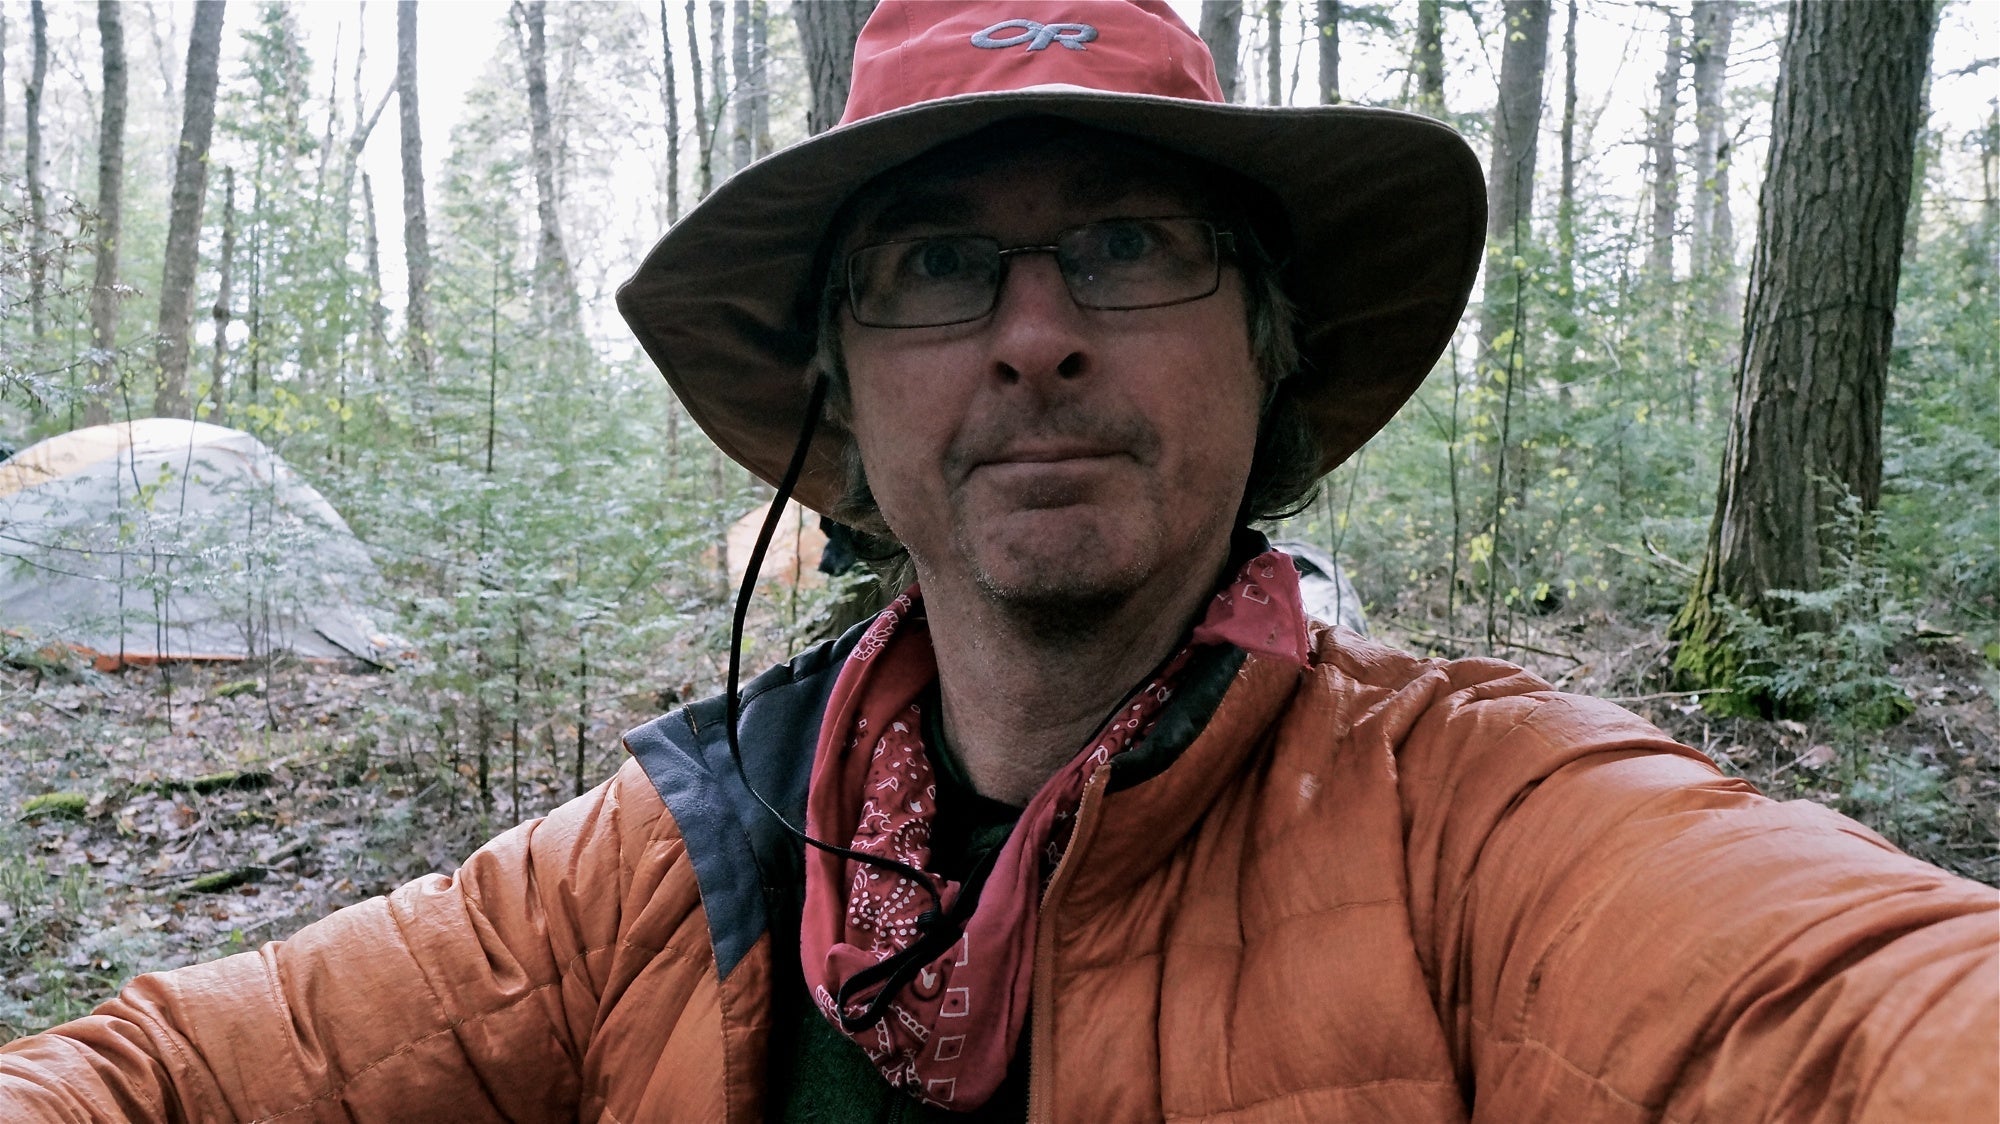 Up Close: Kevin Callan, A Really Happy Camper – Outdoor Research